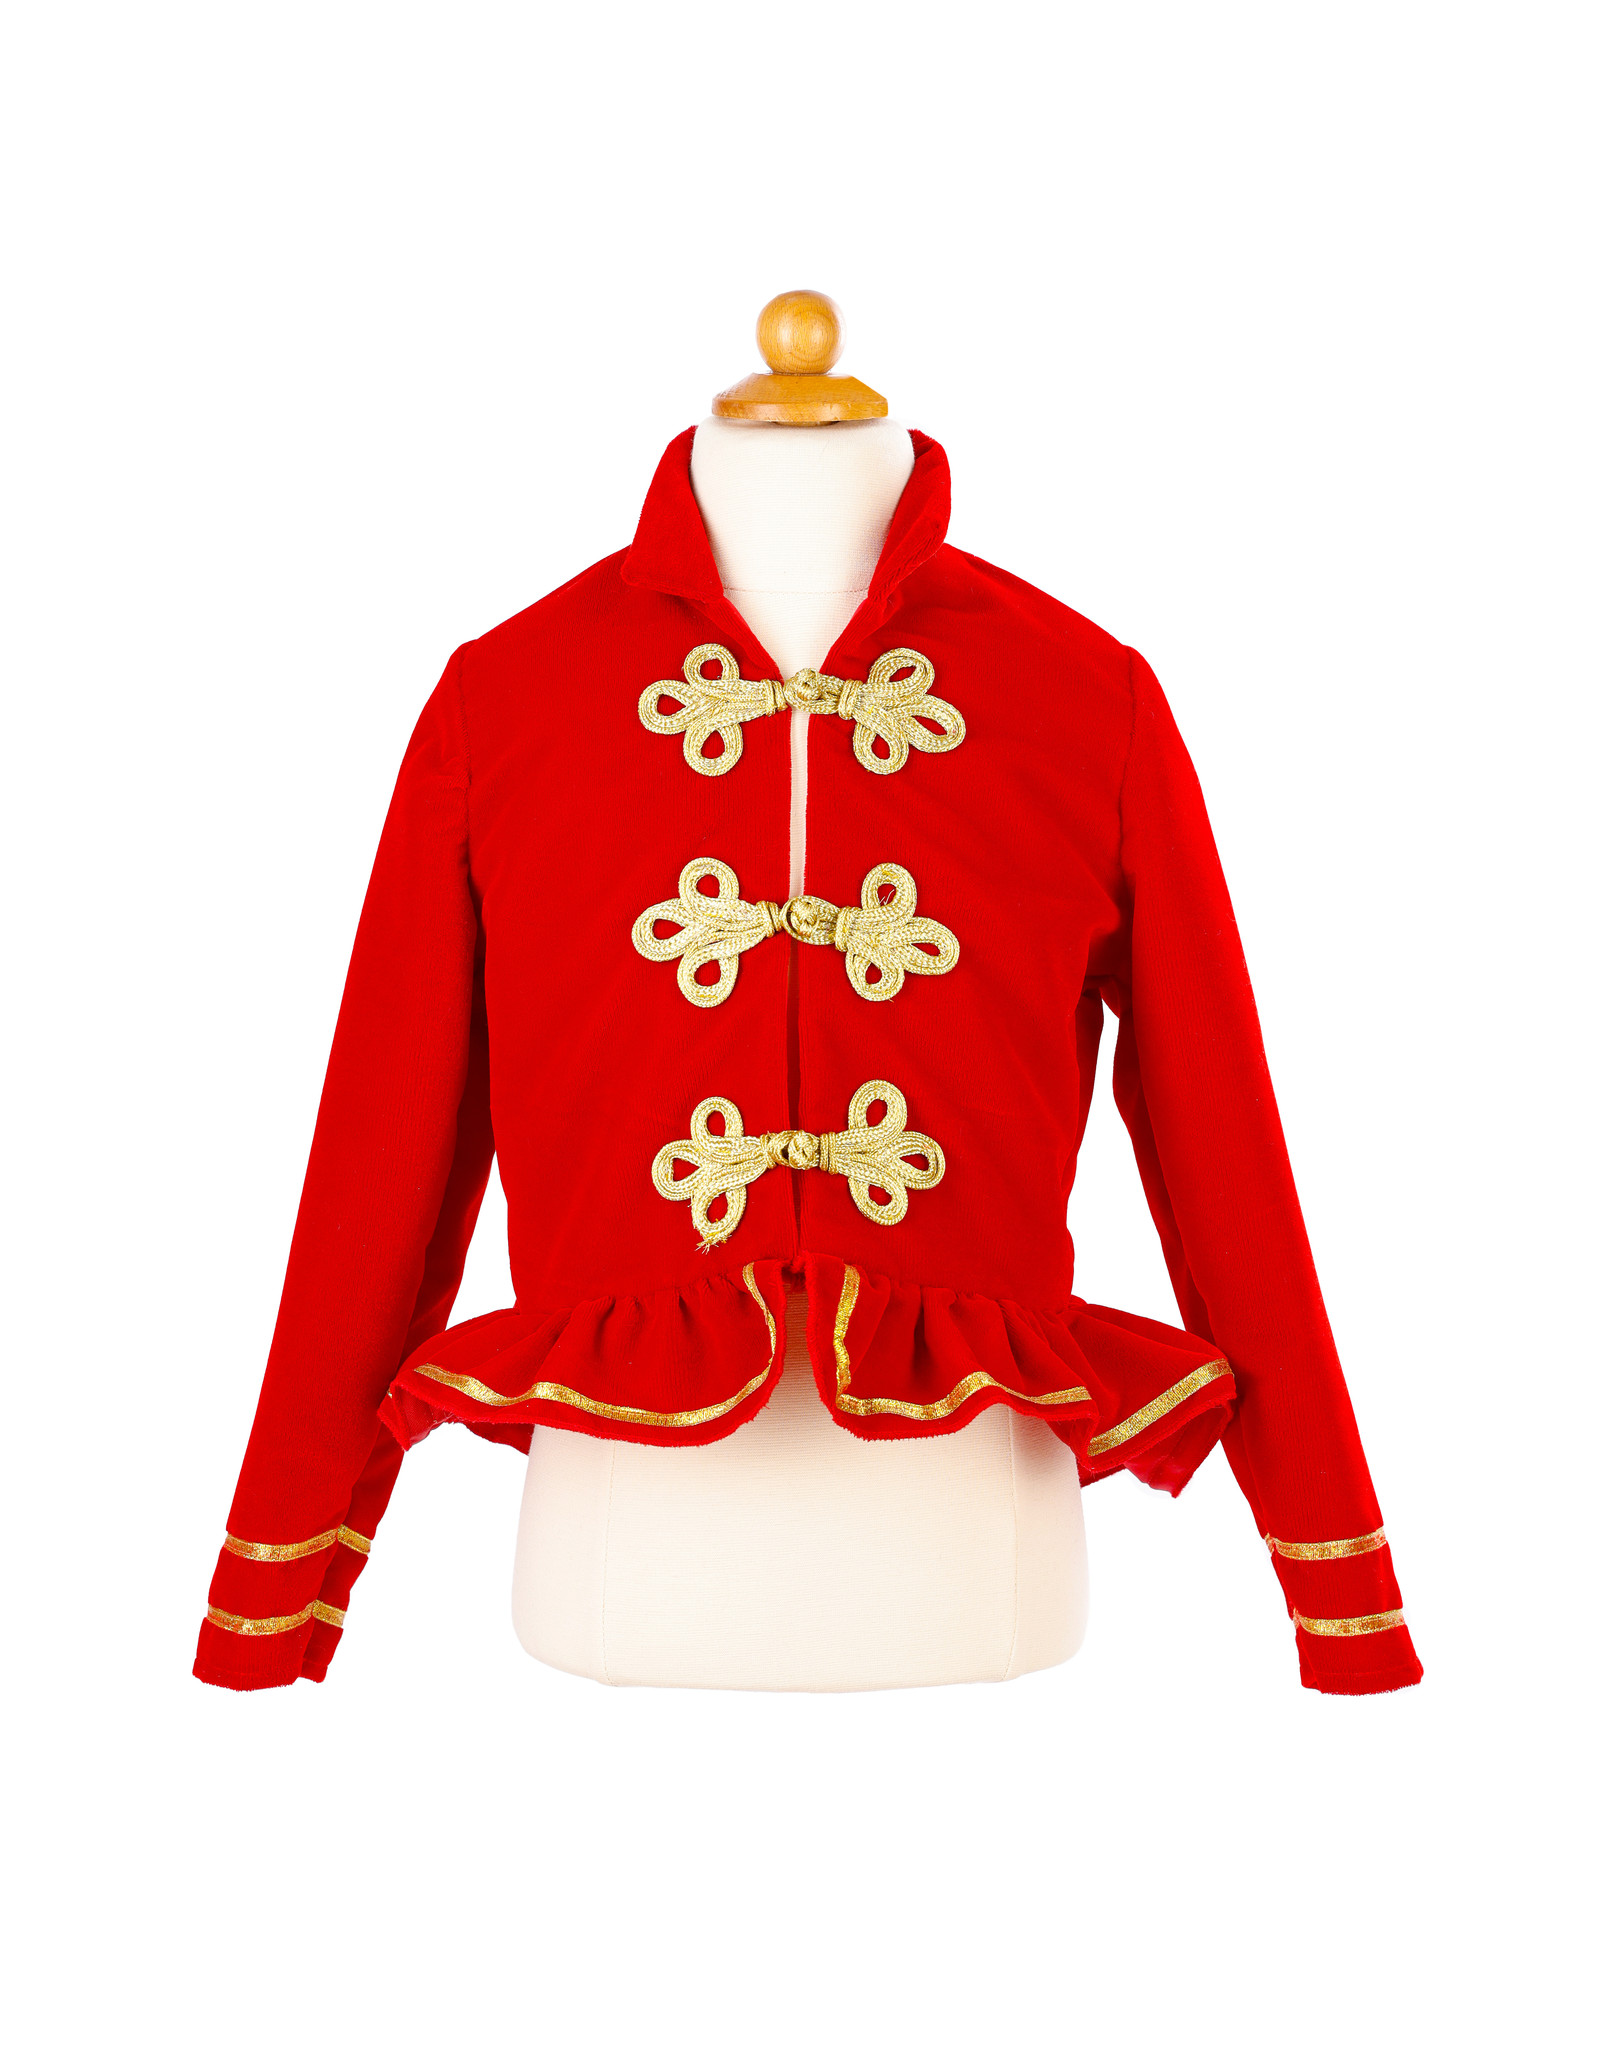 Great Pretenders Toy Soldier Jacket, Size 5/6